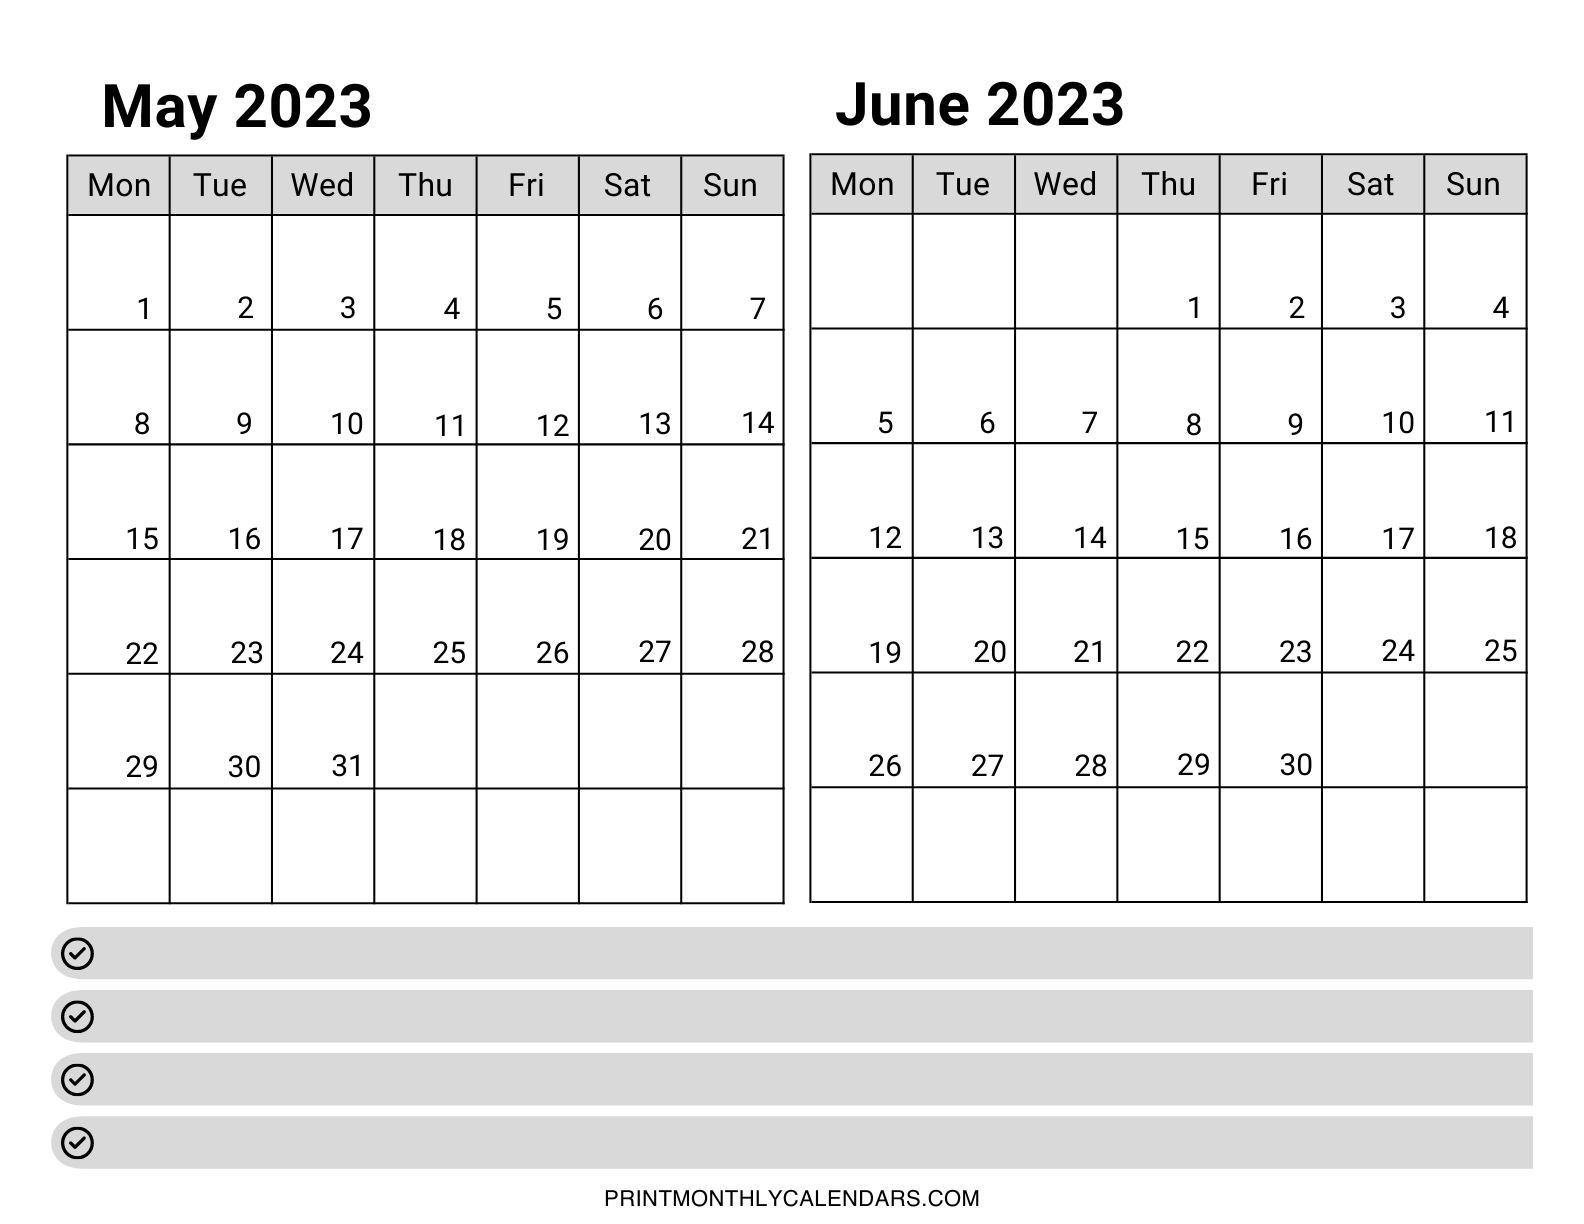 The notes calendar for May and June 2023 contains two grids in landscape format. Weekdays now begin on Monday rather than Sunday. Blank rows are provided at the bottom of the template for jotting down crucial information.